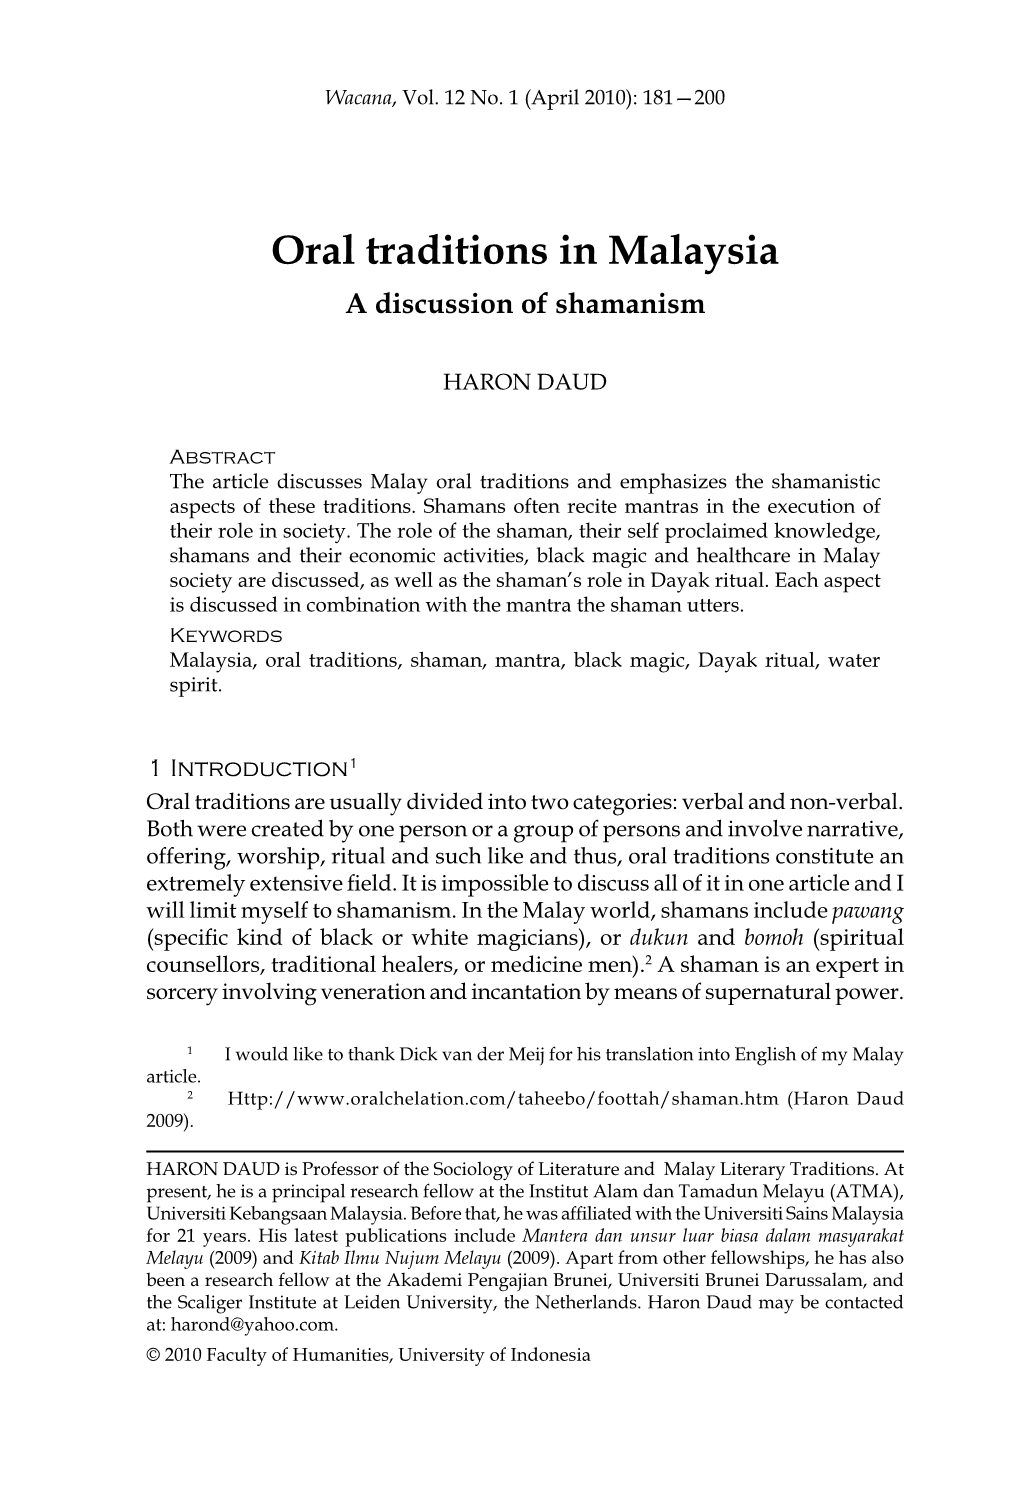 Oral Traditions in Malaysia a Discussion of Shamanism